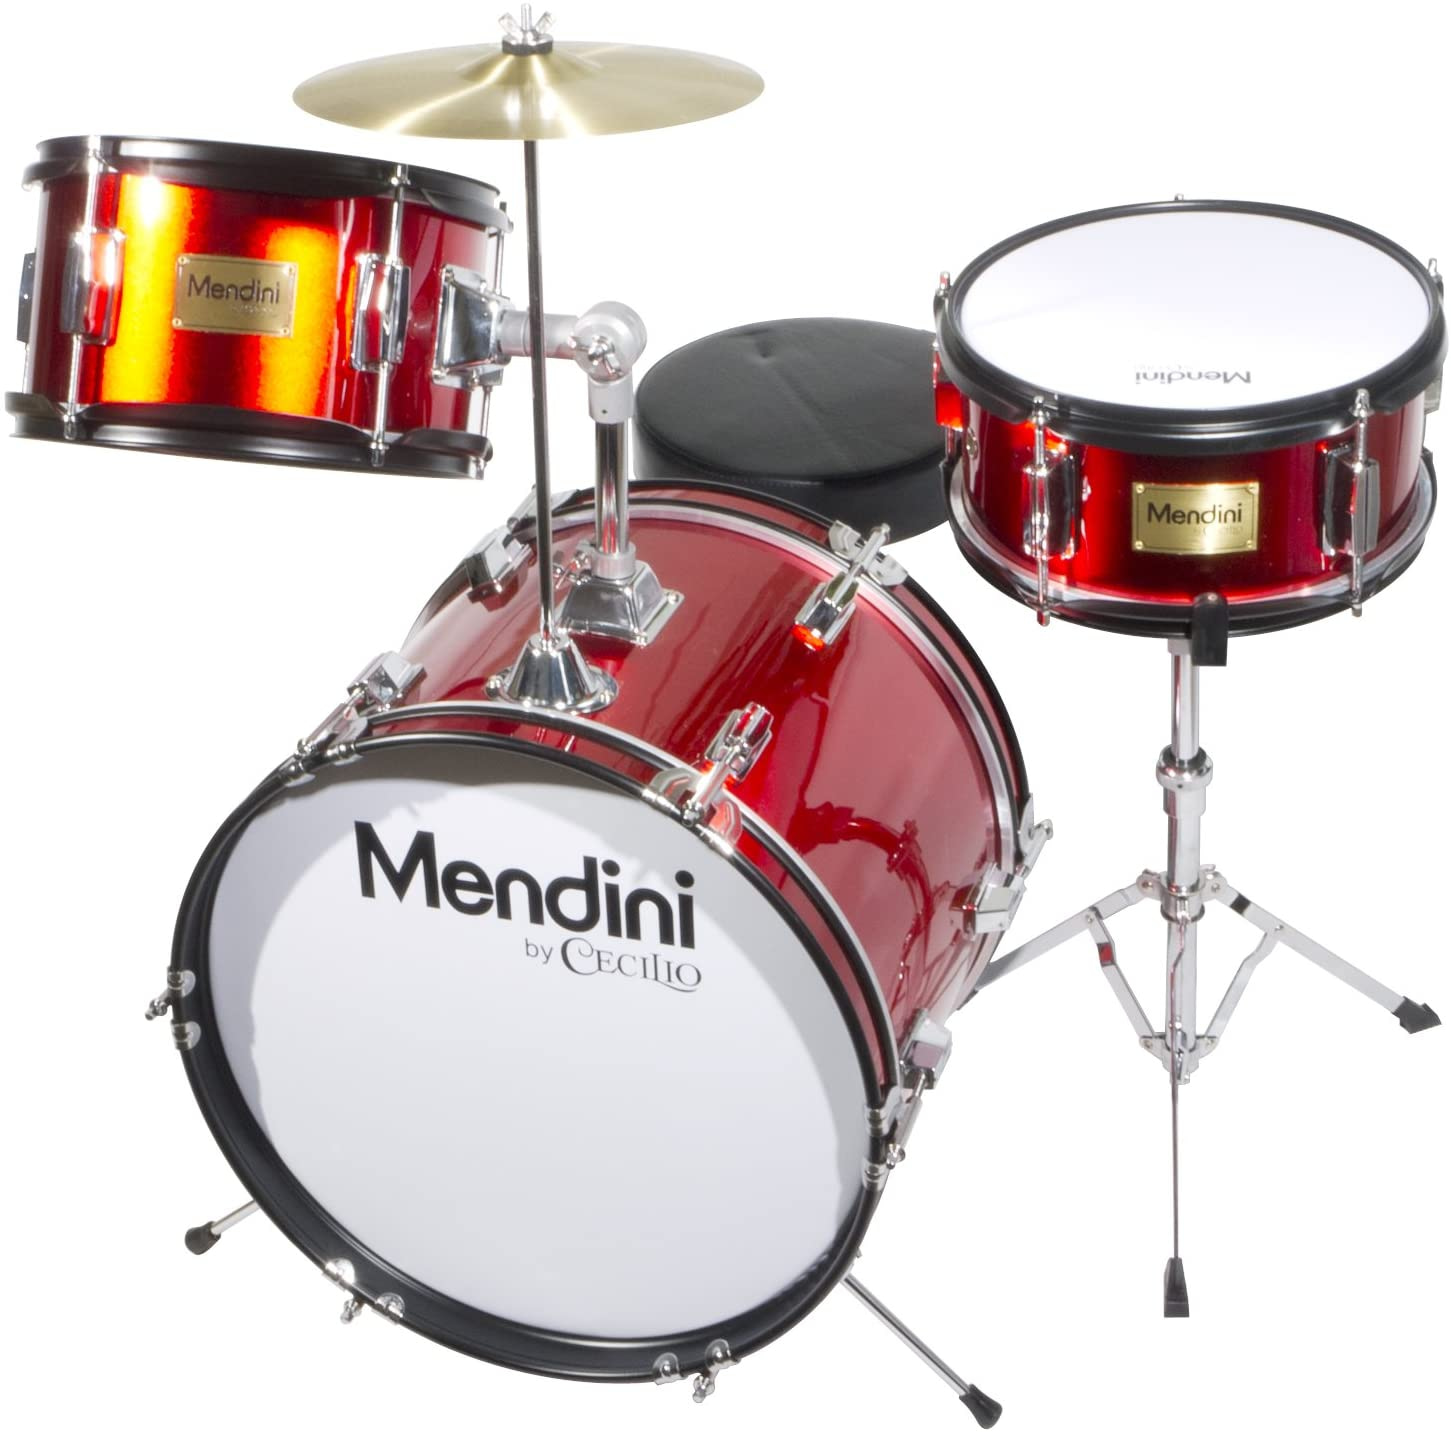 Mendini by Cecilio 16 inch 3-Piece Kids/Junior Drum Set with Adjustable Throne, Cymbal, Pedal & Drumsticks, Metallic Green, MJDS-3-GN 19